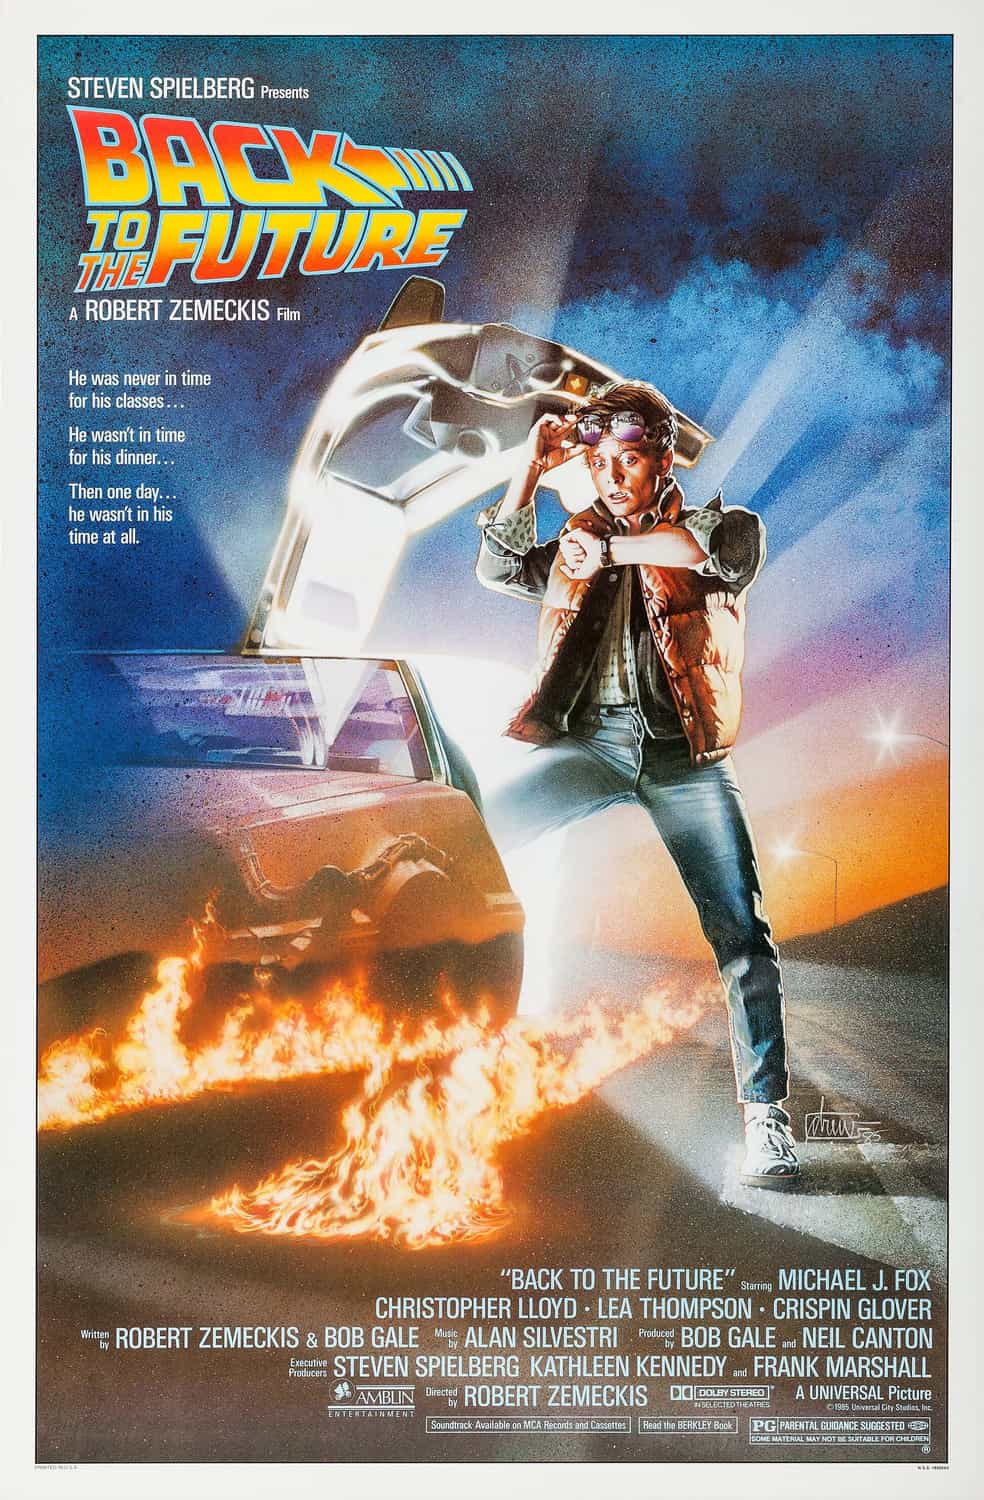 Back to the Future on Blu-ray this year?
